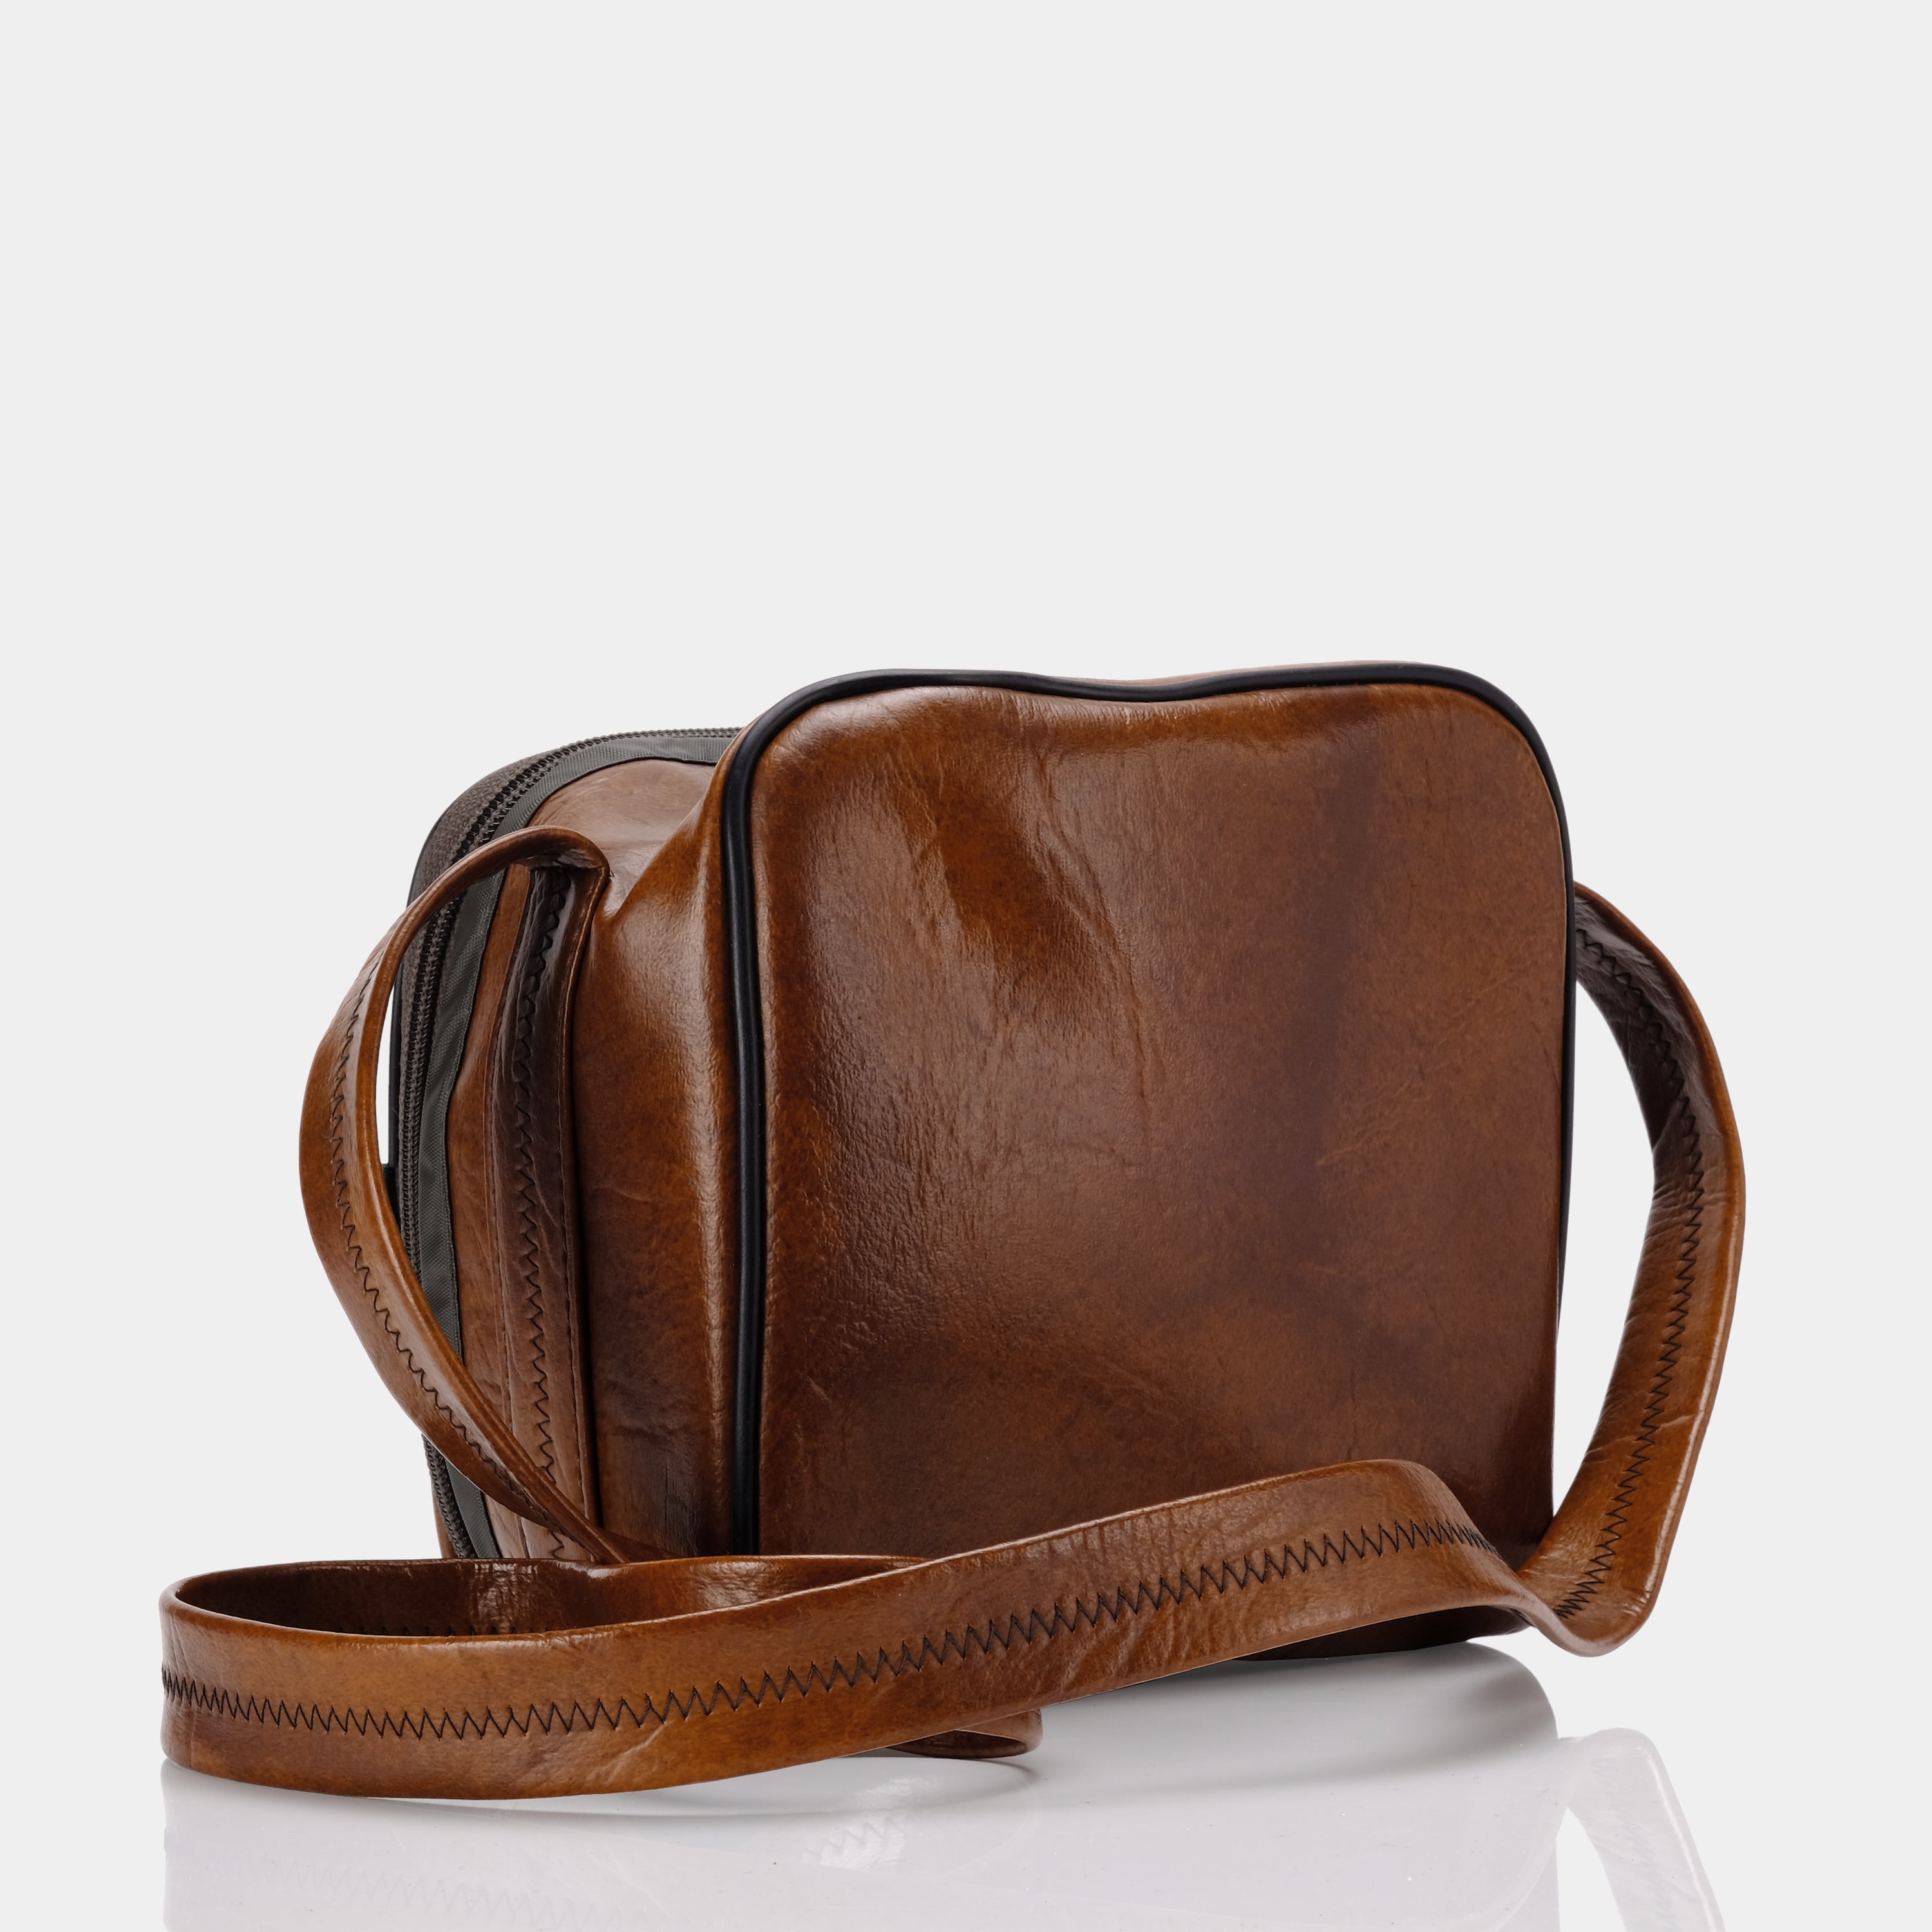 Brown Leather Square Camera Bag